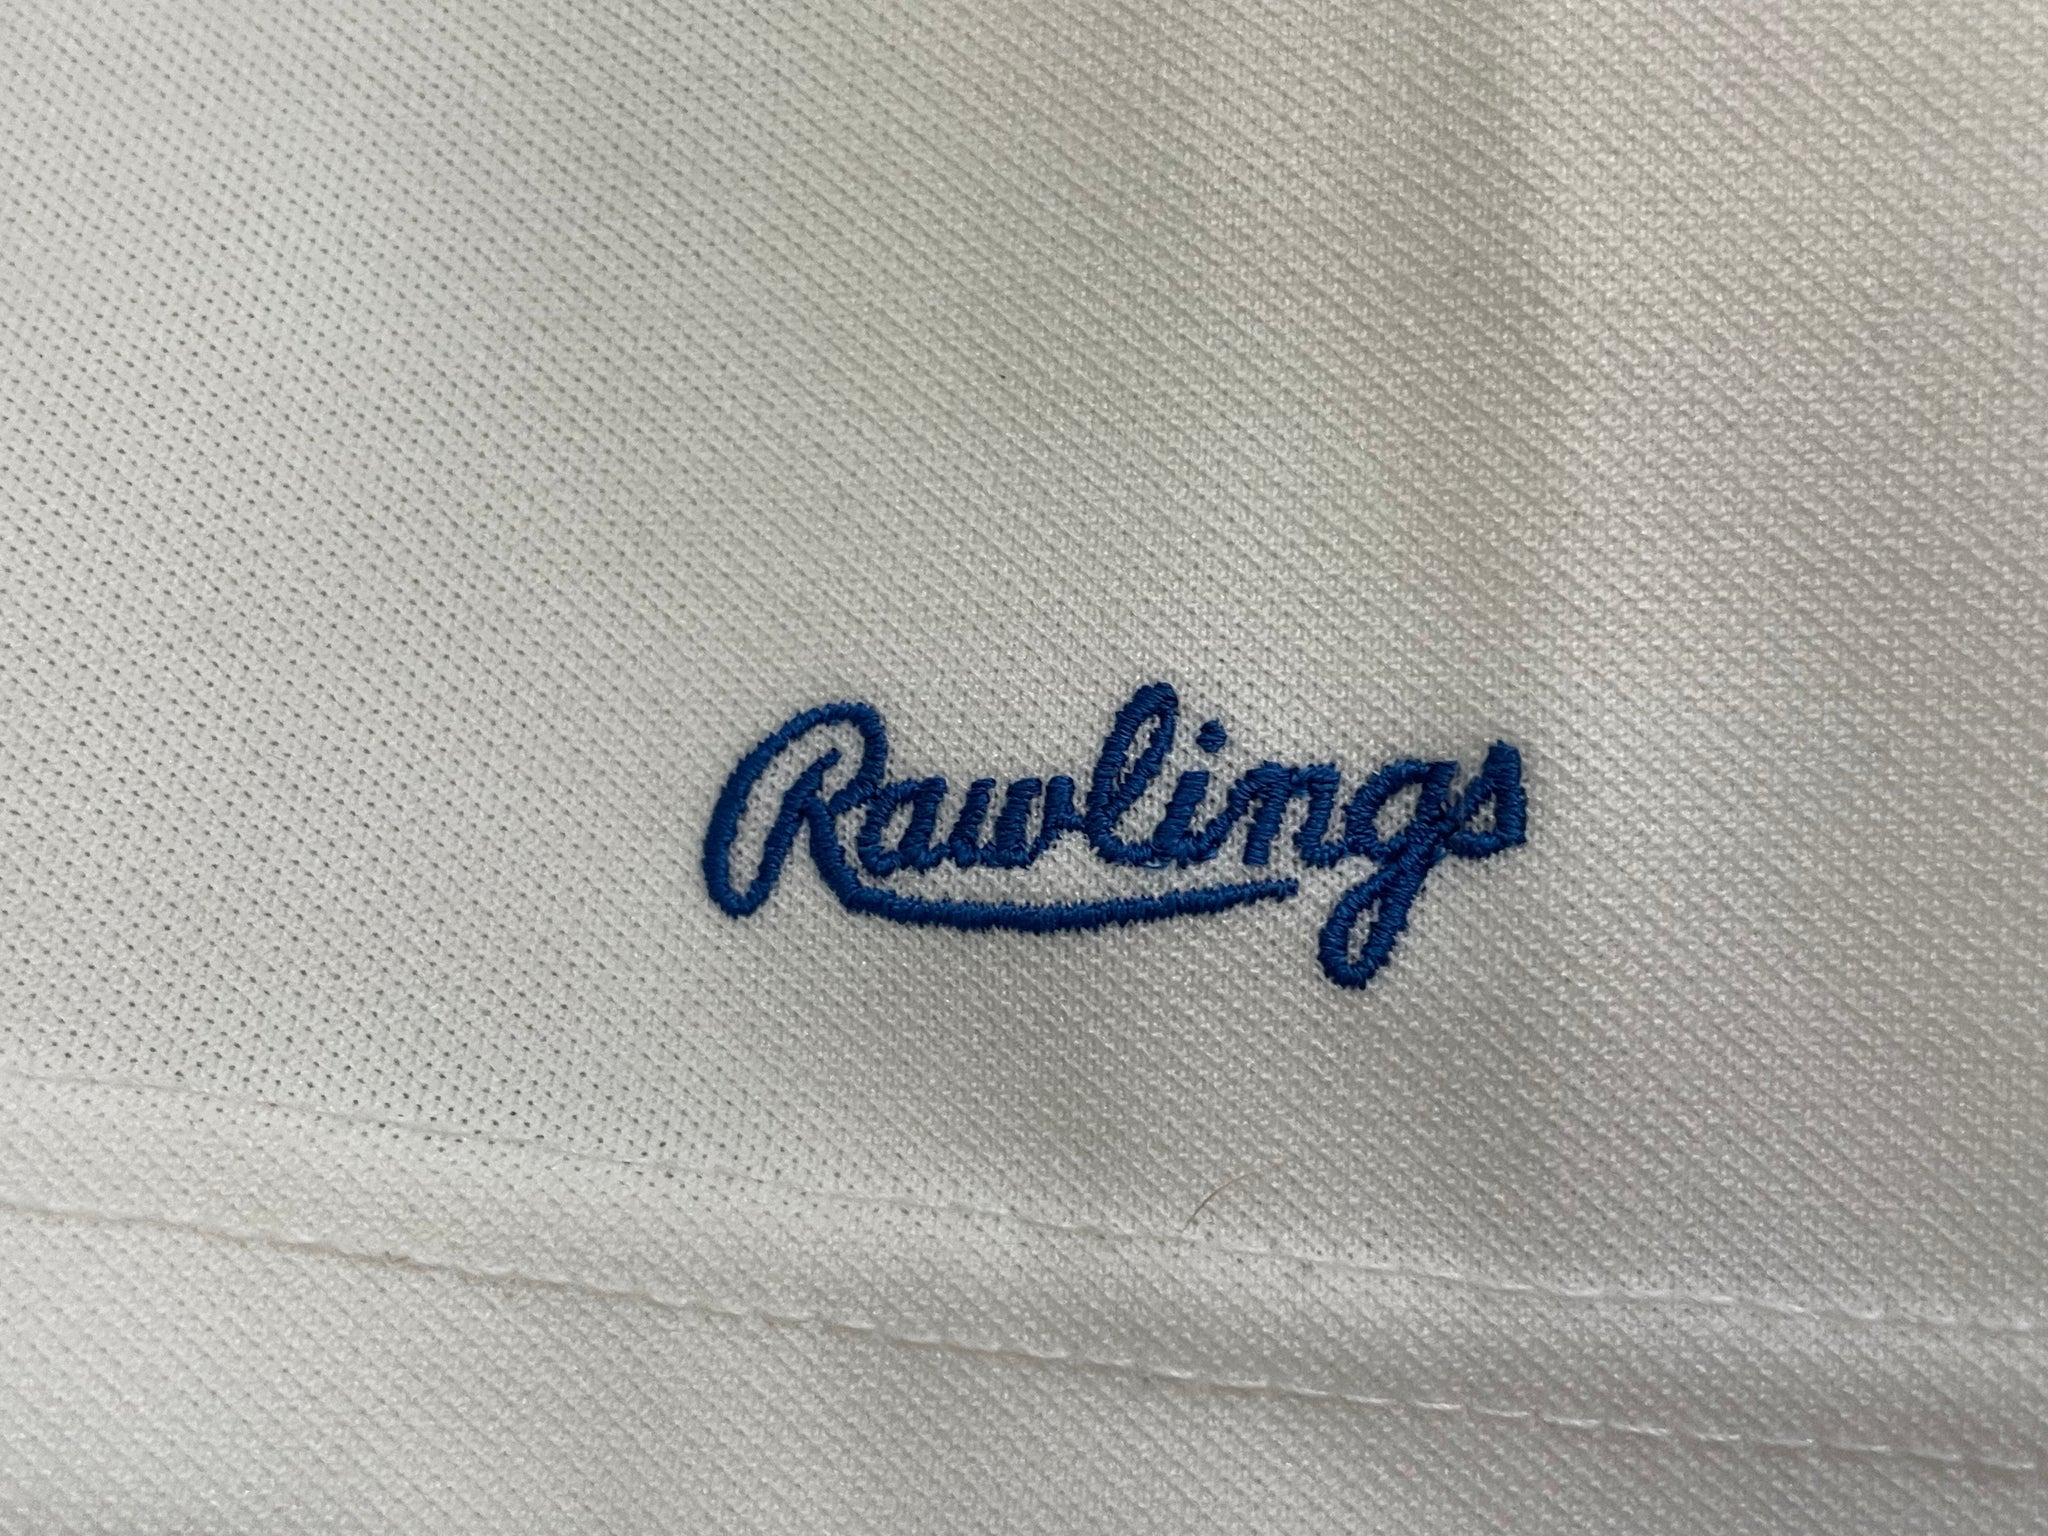 VINTAGE AUTHENTIC LOS ANGELES DODGERS JERSEY 52 XXL RAWLINGS RARE